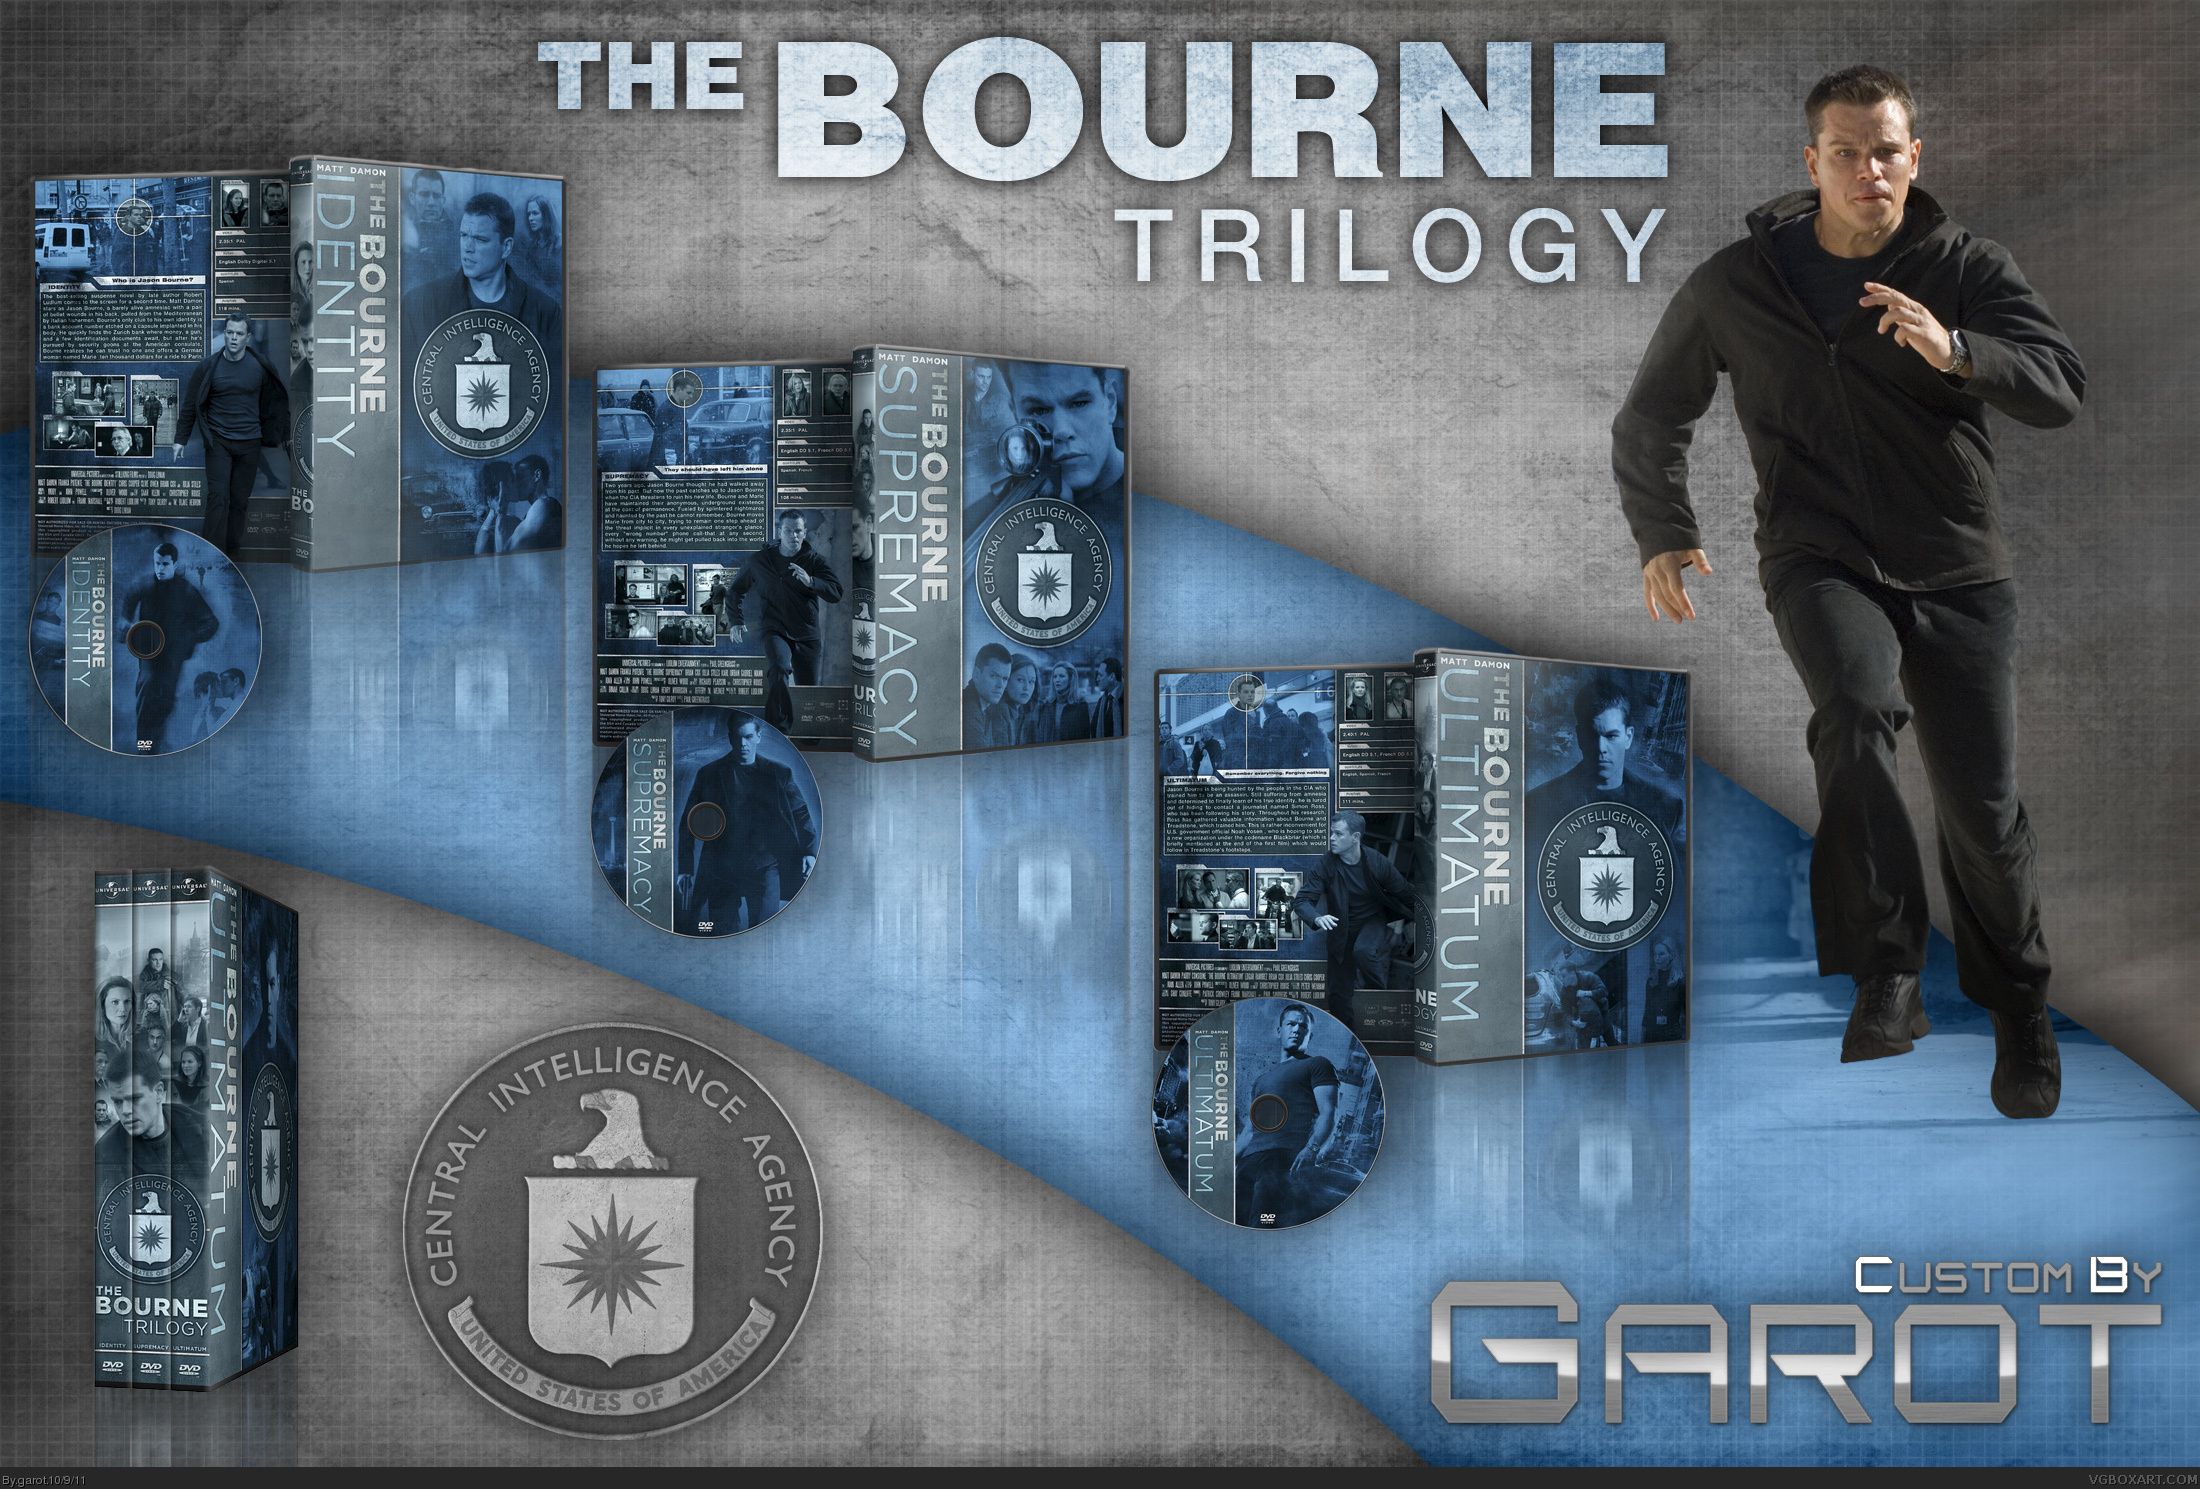 The Bourne Trilogy box cover